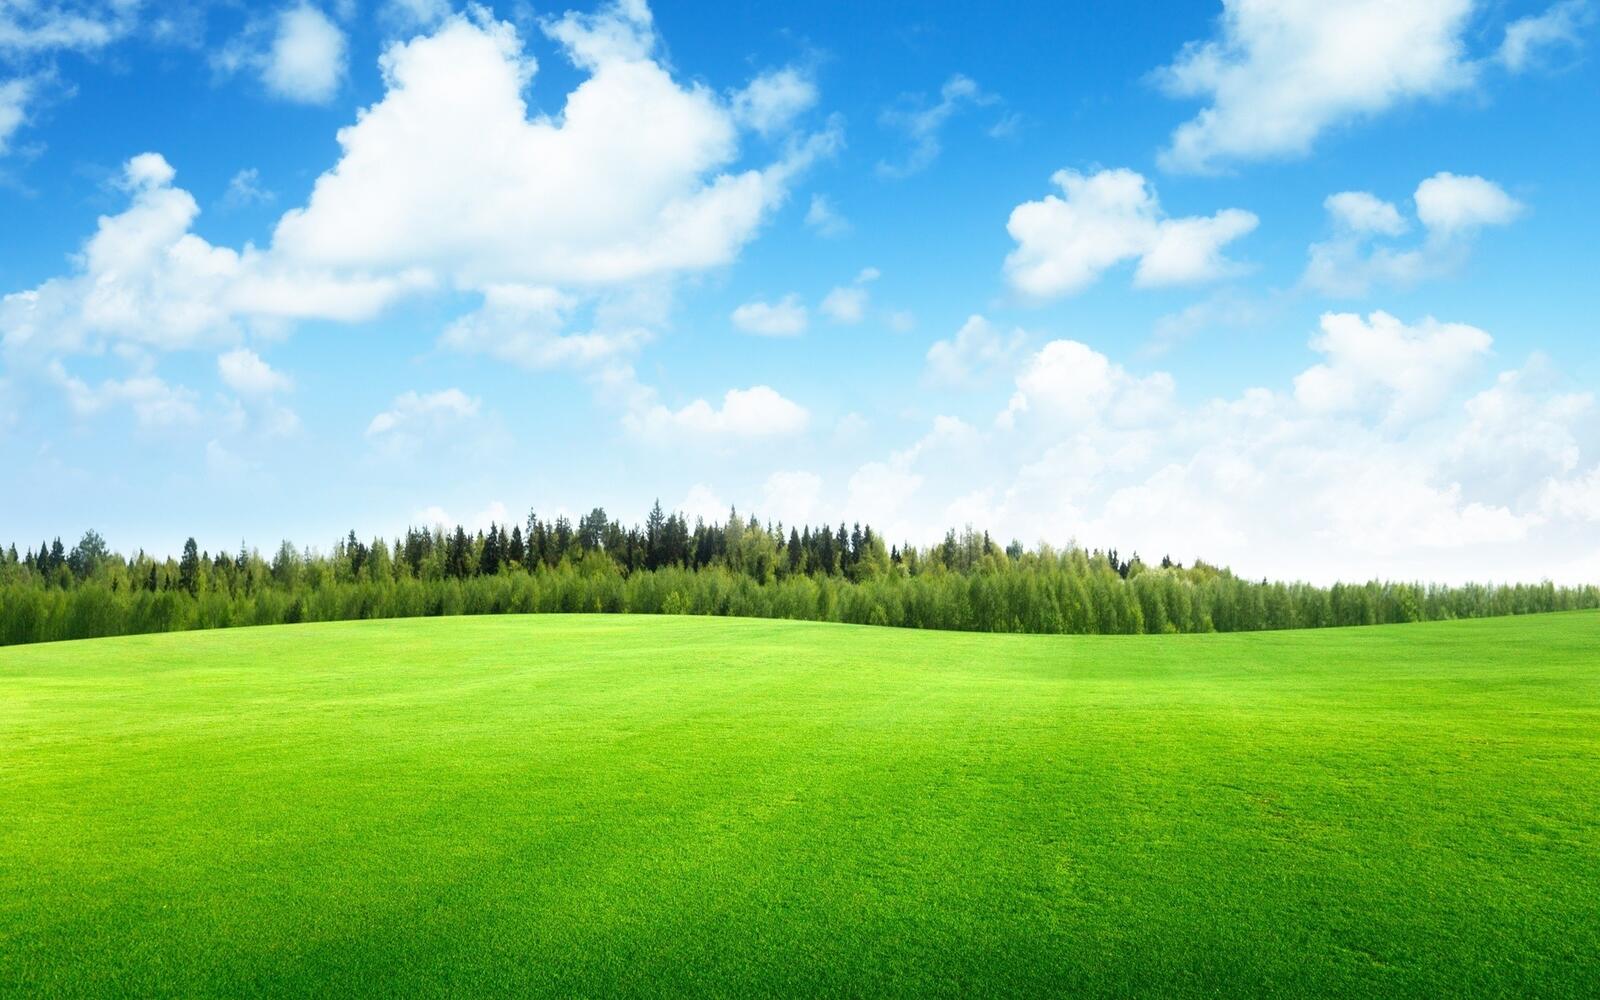 Wallpapers grass nature natural environment on the desktop